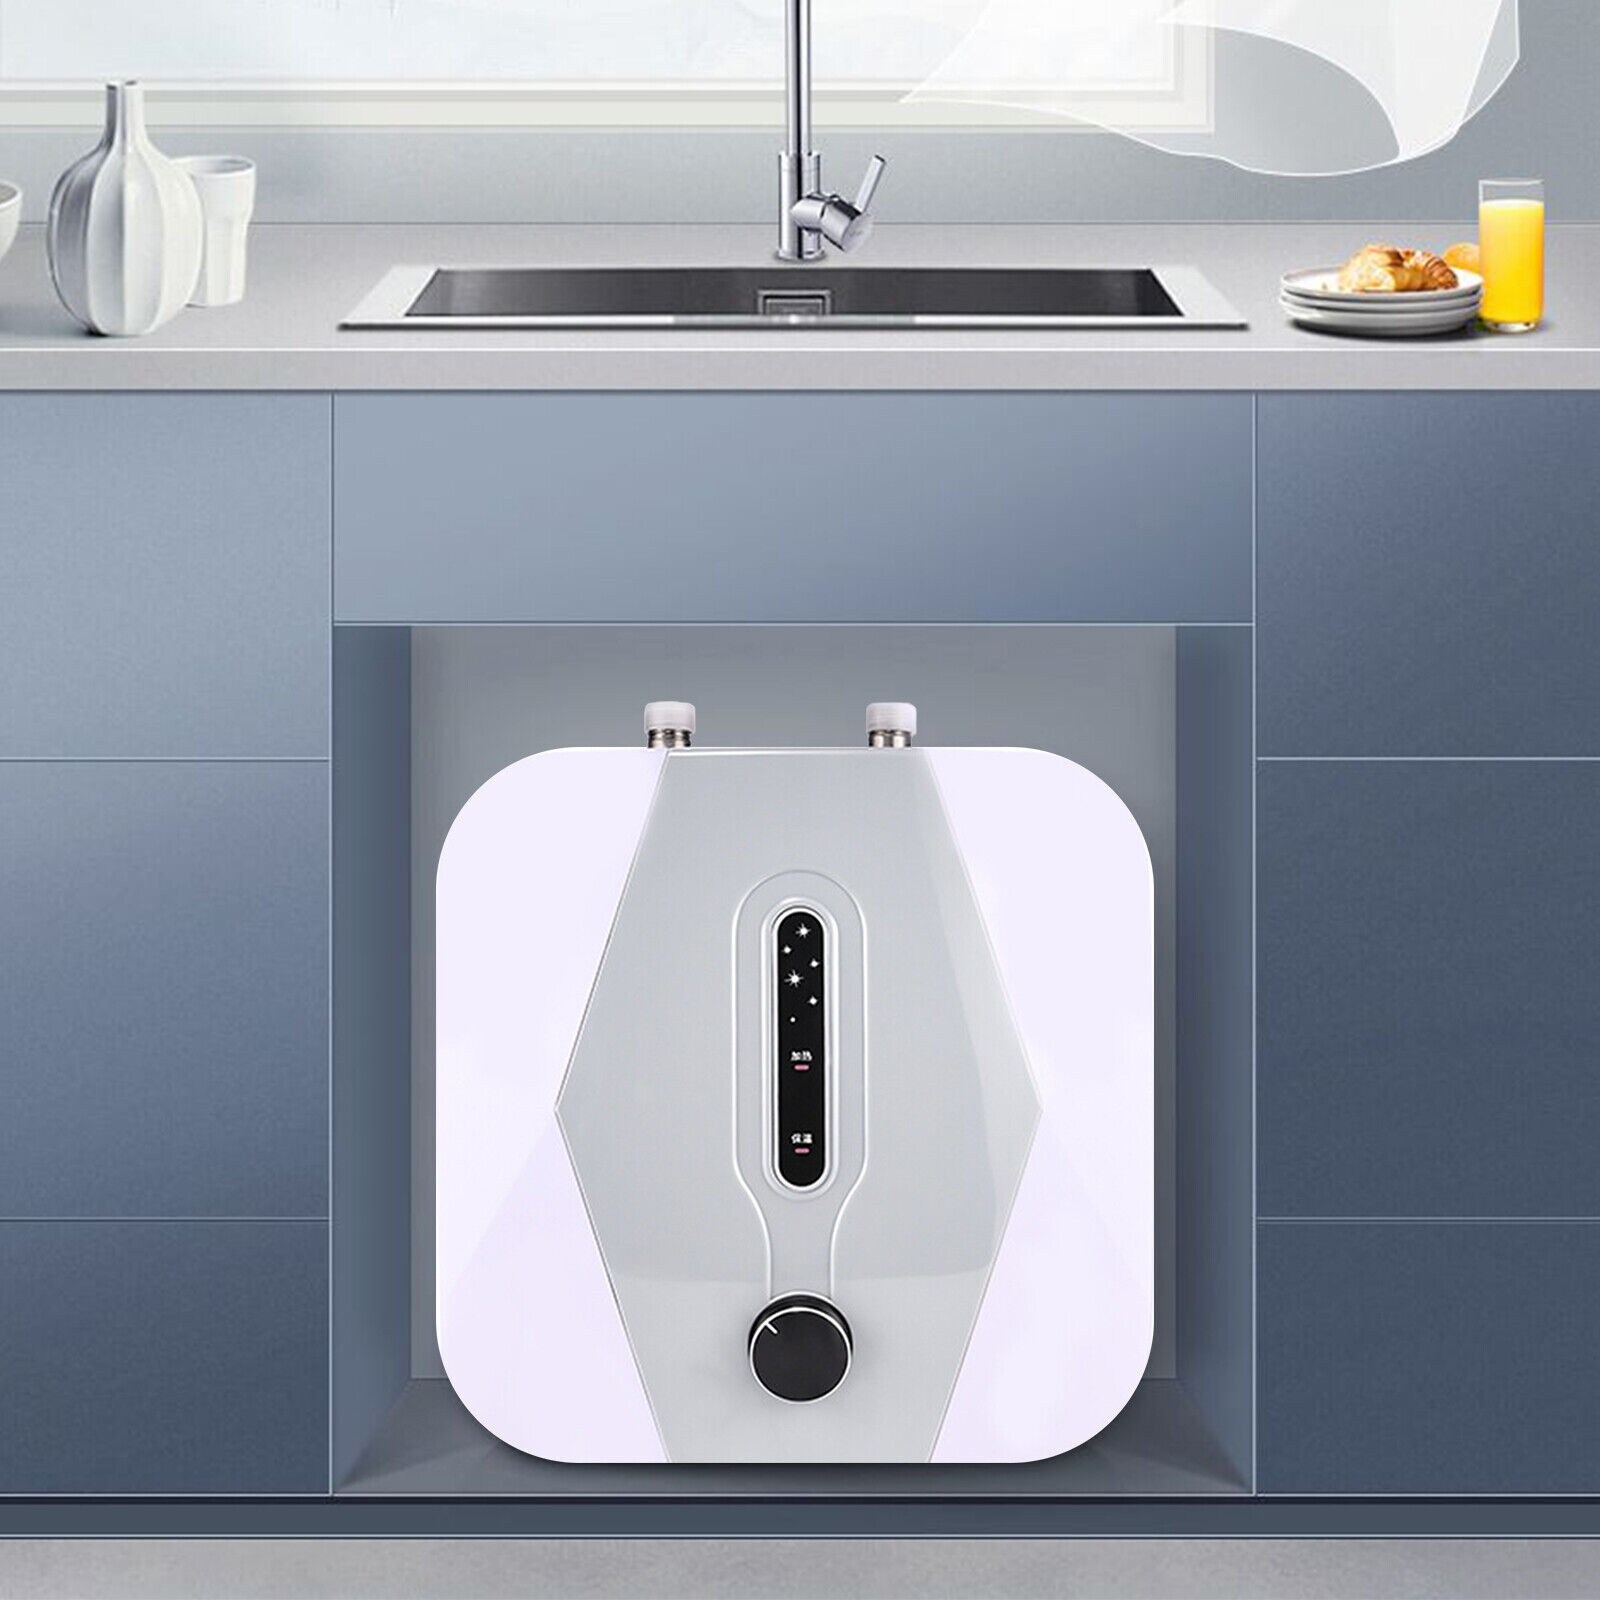 https://ak1.ostkcdn.com/images/products/is/images/direct/82ffad3d47ce470b430f949ce10c562732d3306e/8-L-Electric-Instant-Hot-Water-Heater-Under-Sink-Mini-Warm-Water-Tank.jpg